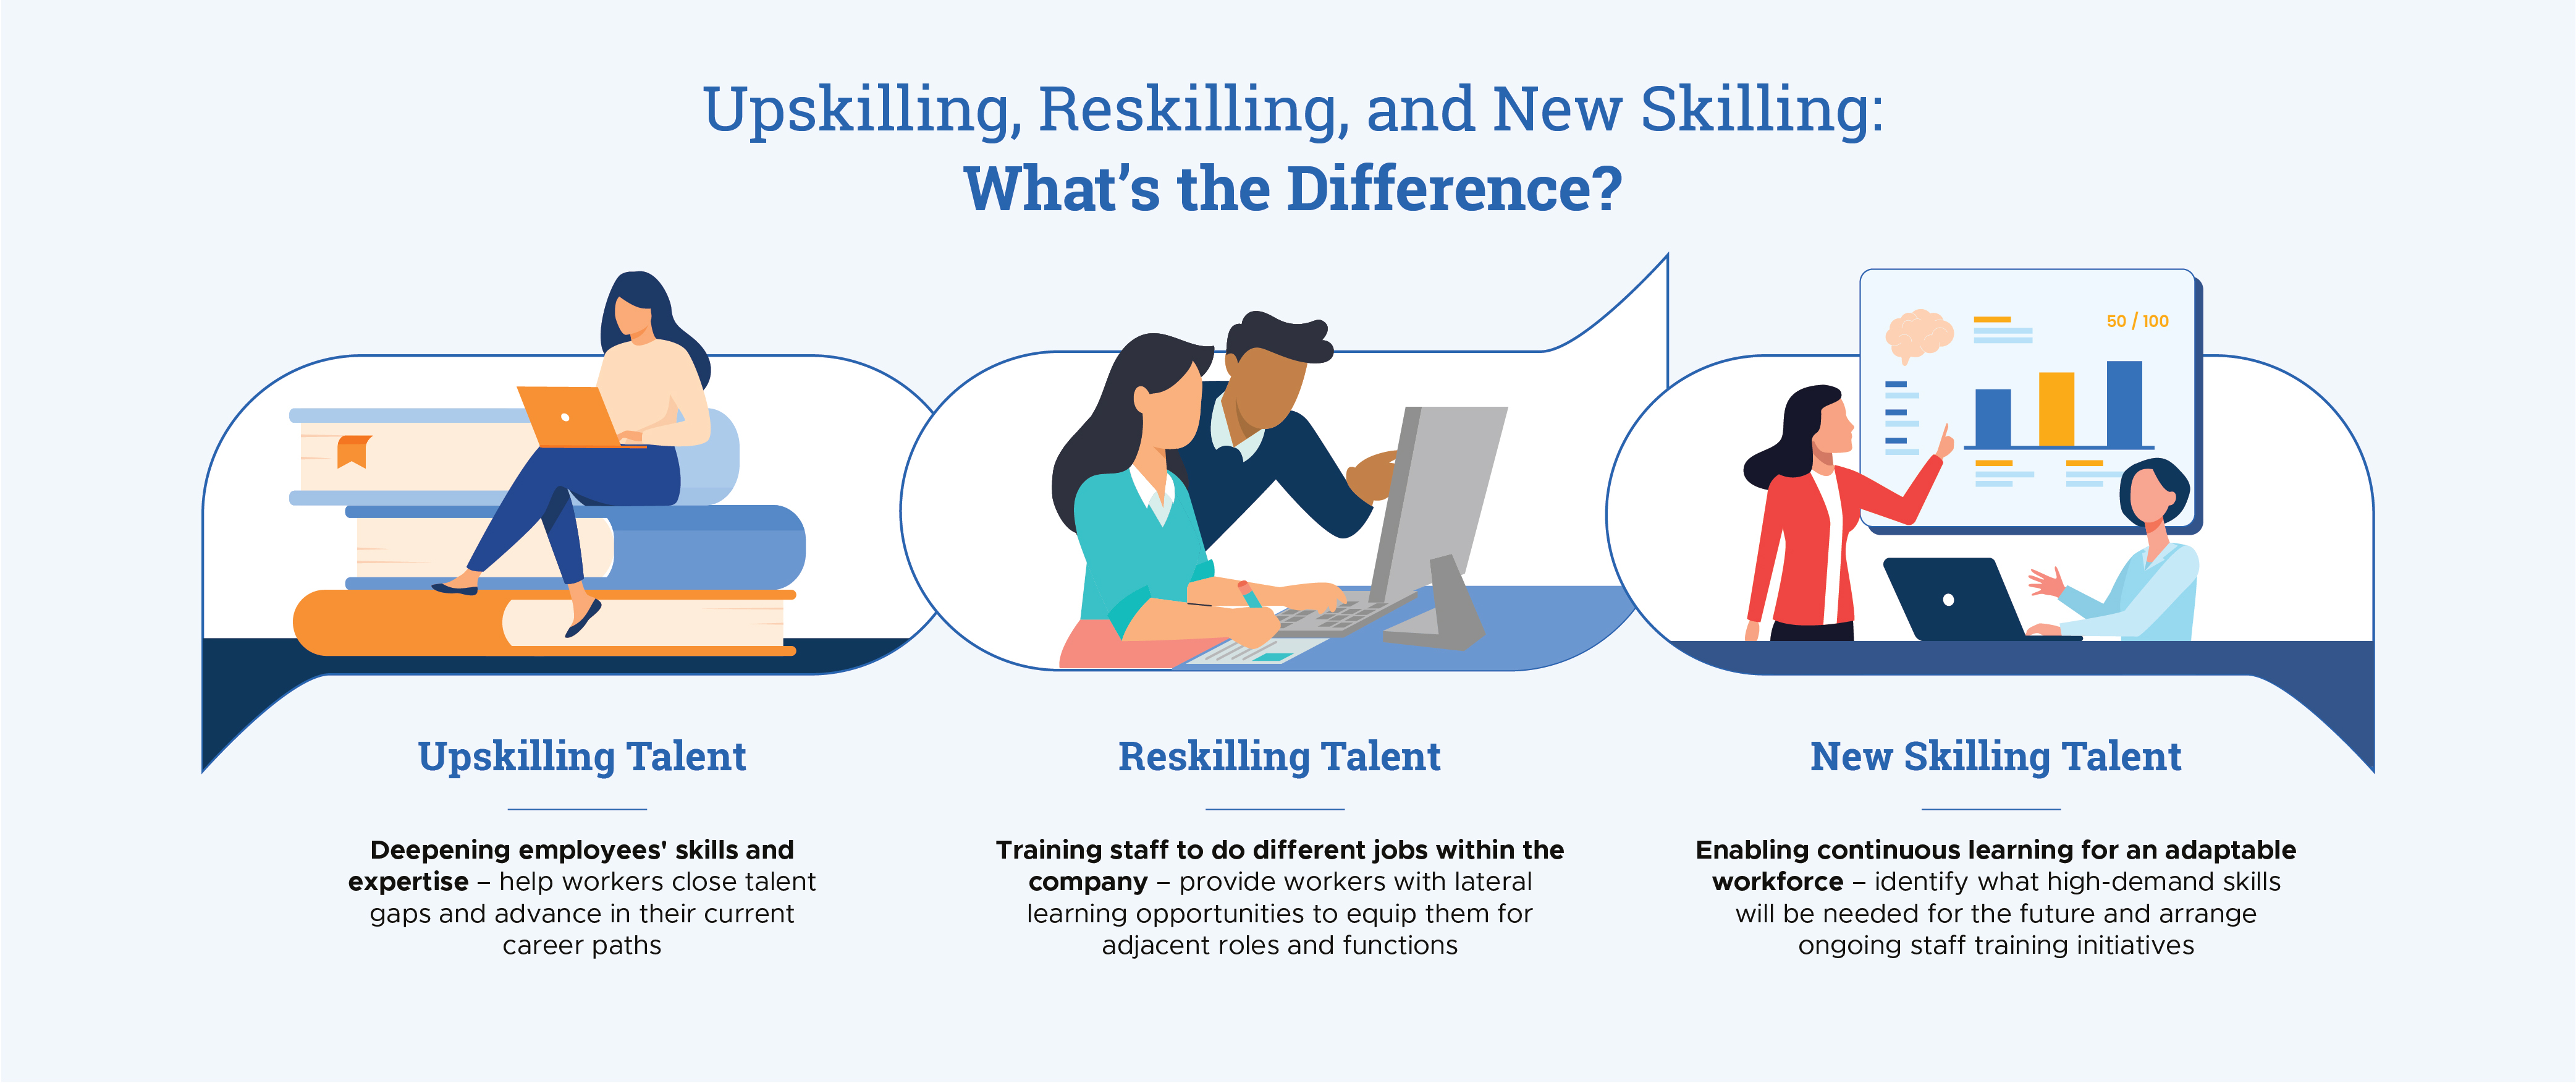 Upskilling, Reskilling and New Skilling: What's the Difference?